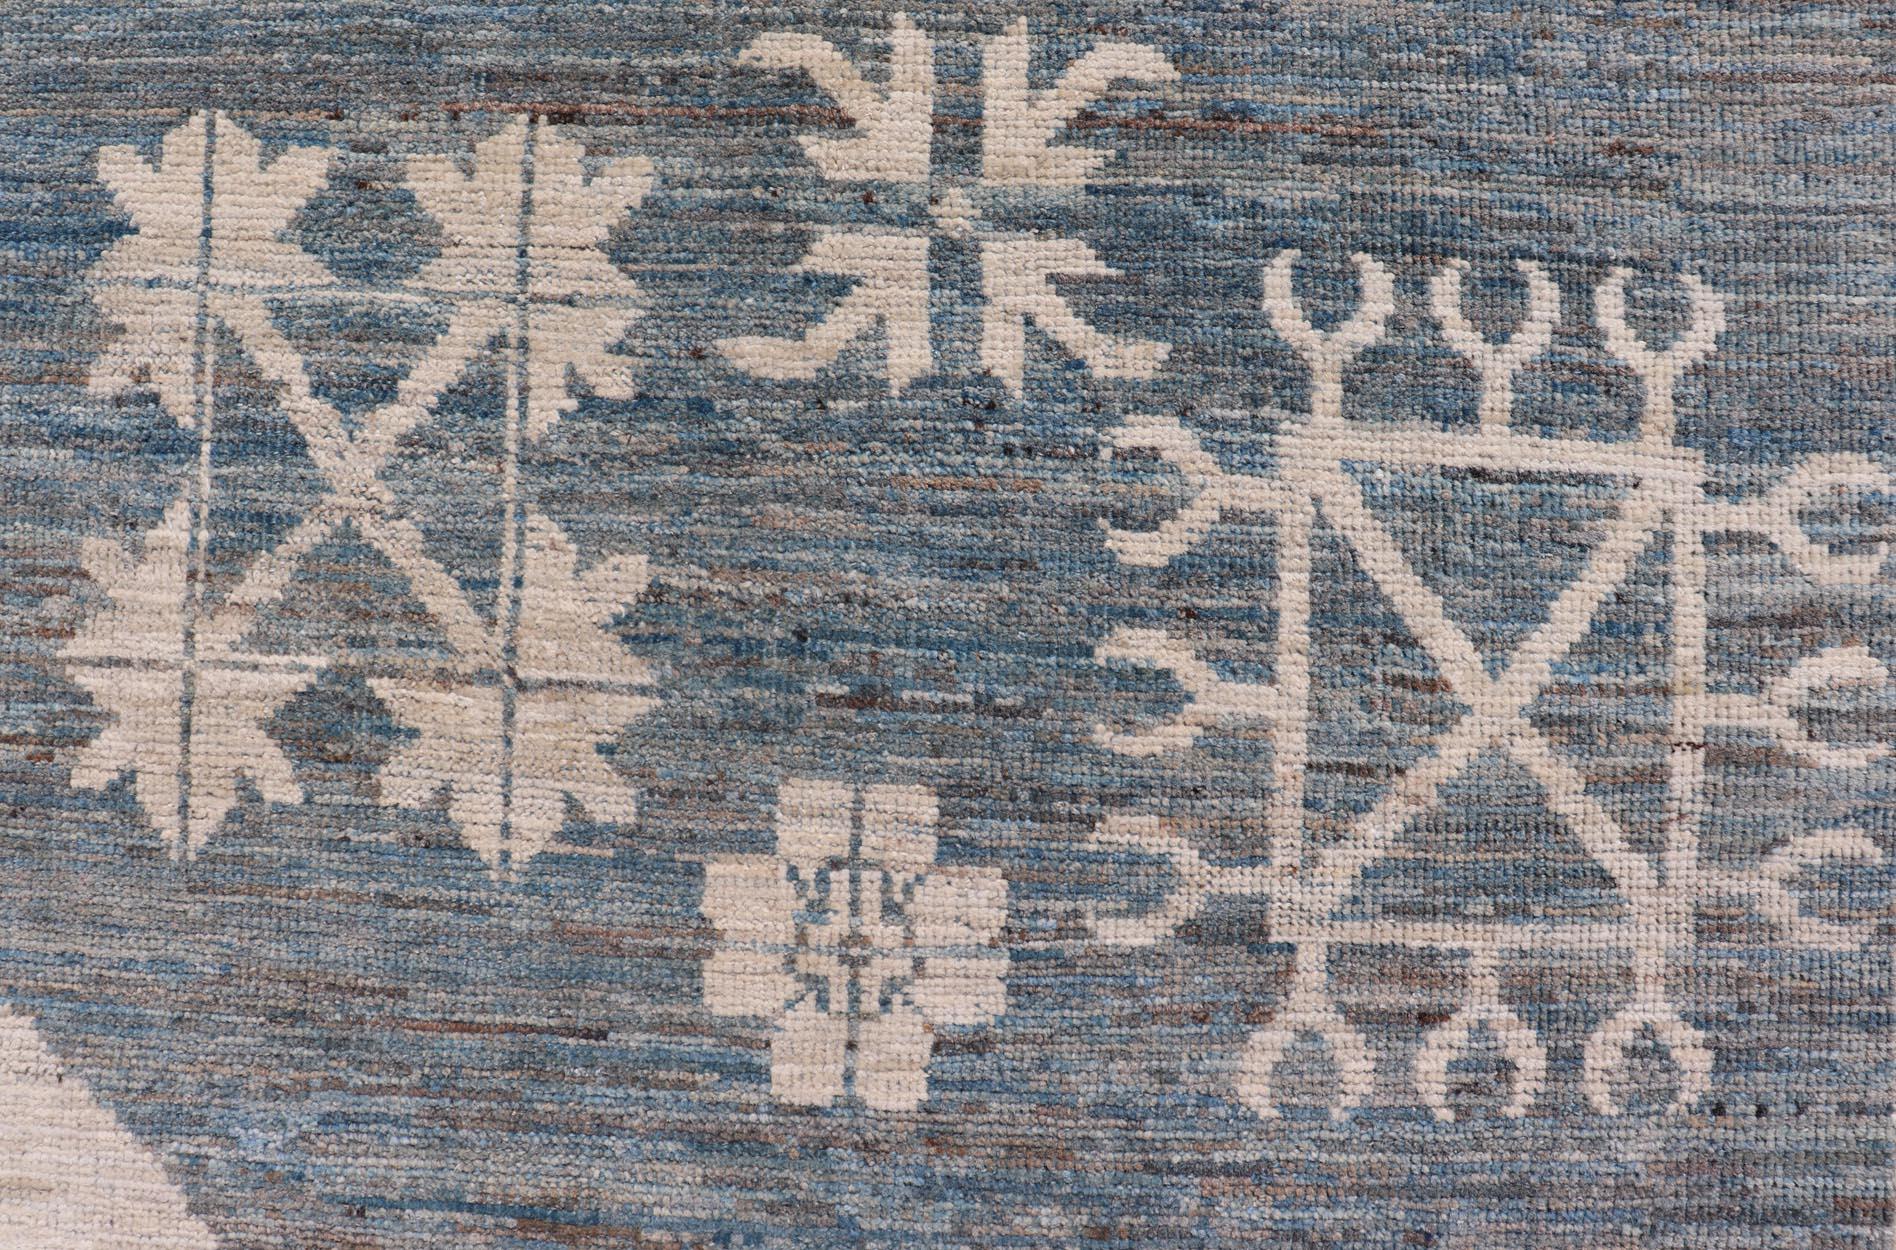 Contemporary Modern Khotan Rug with Circular Medallions in Shades of Steel Blue & off White For Sale